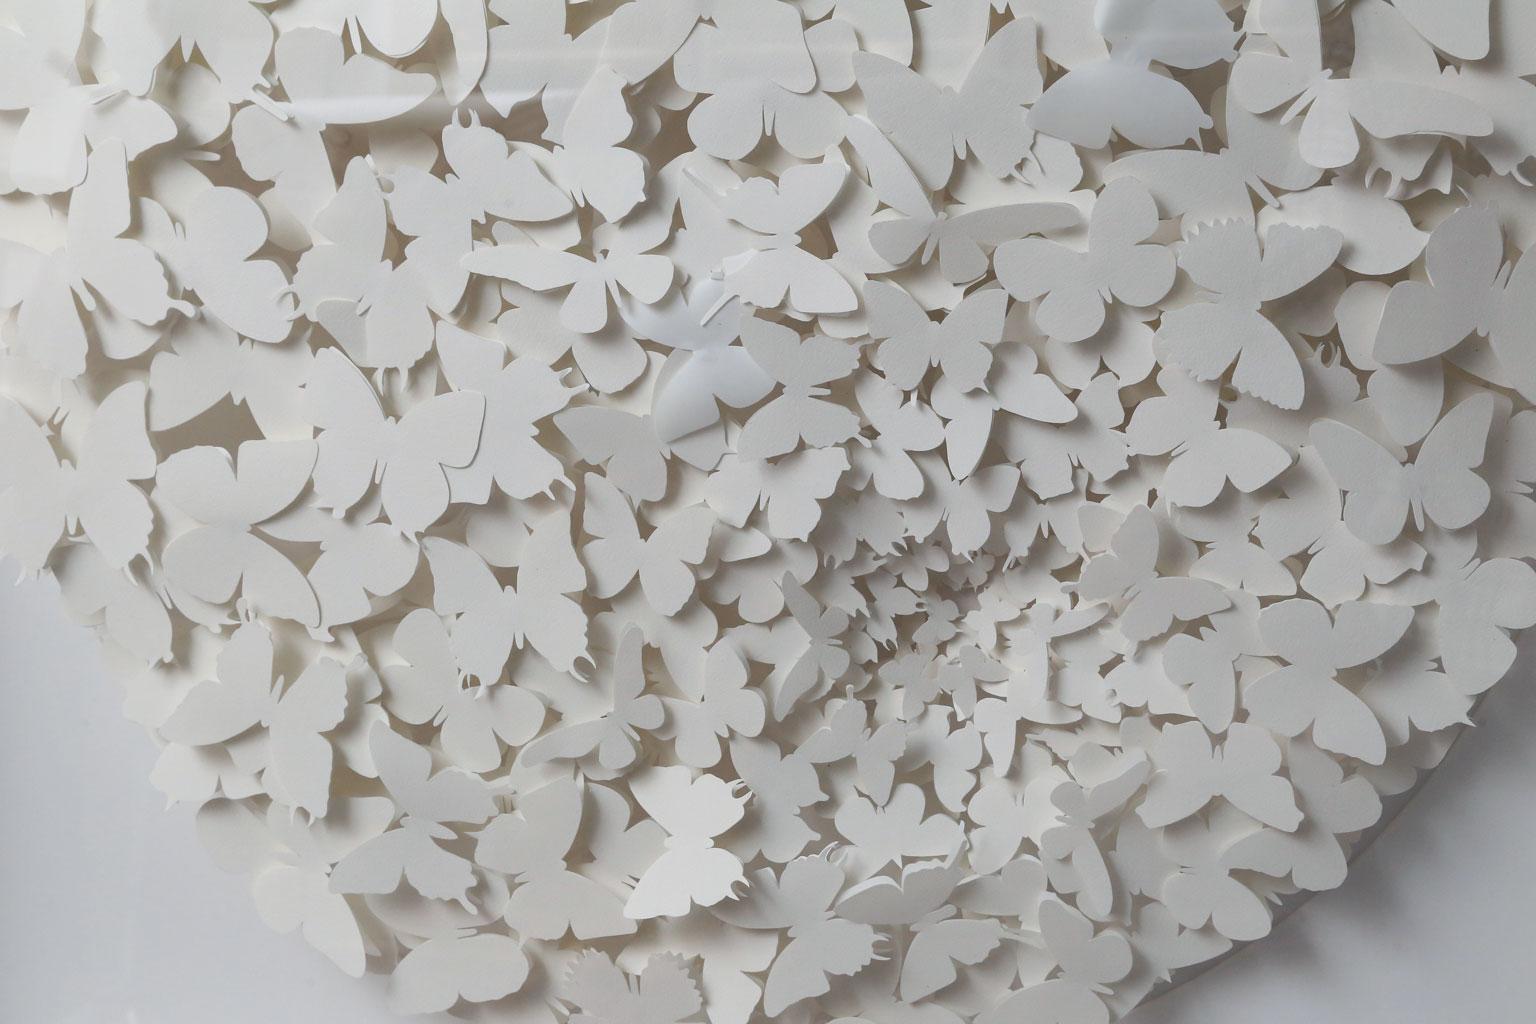 White paper butterfly box: the butterflies are handcut from Strathmore Aquarius II 80 lb paper. The use of white reduces the butterflies to their purest form and they are arranged to appear animated as if in flight. All papers, mats and backers are